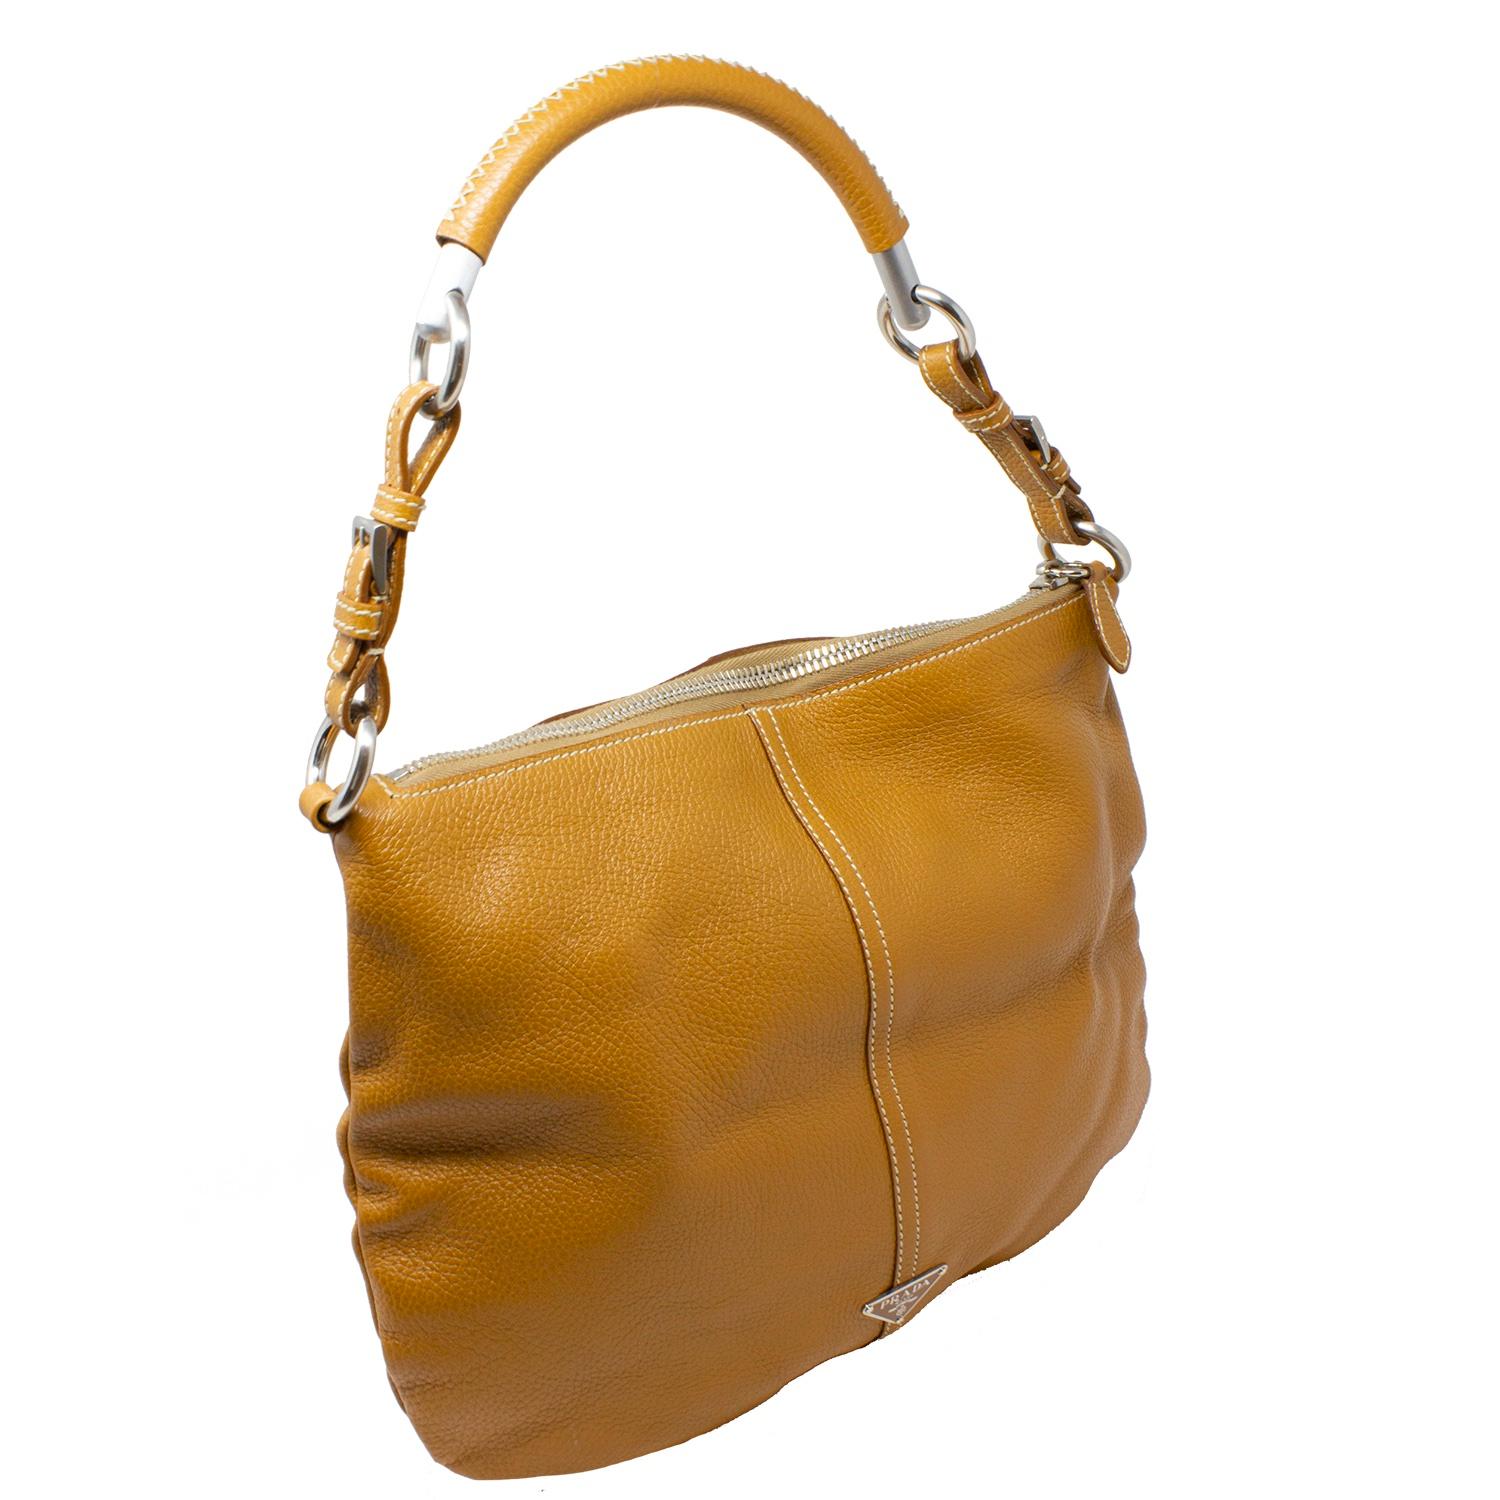 Stunning Prada shoulder bag crafted in a gorgeous natural tan leather, with a contrasting white wild stitch running down the center and on the handle shoulder guard. With silver-tone hardware, the top zipper opens up to a Logo Jacquard lining with a